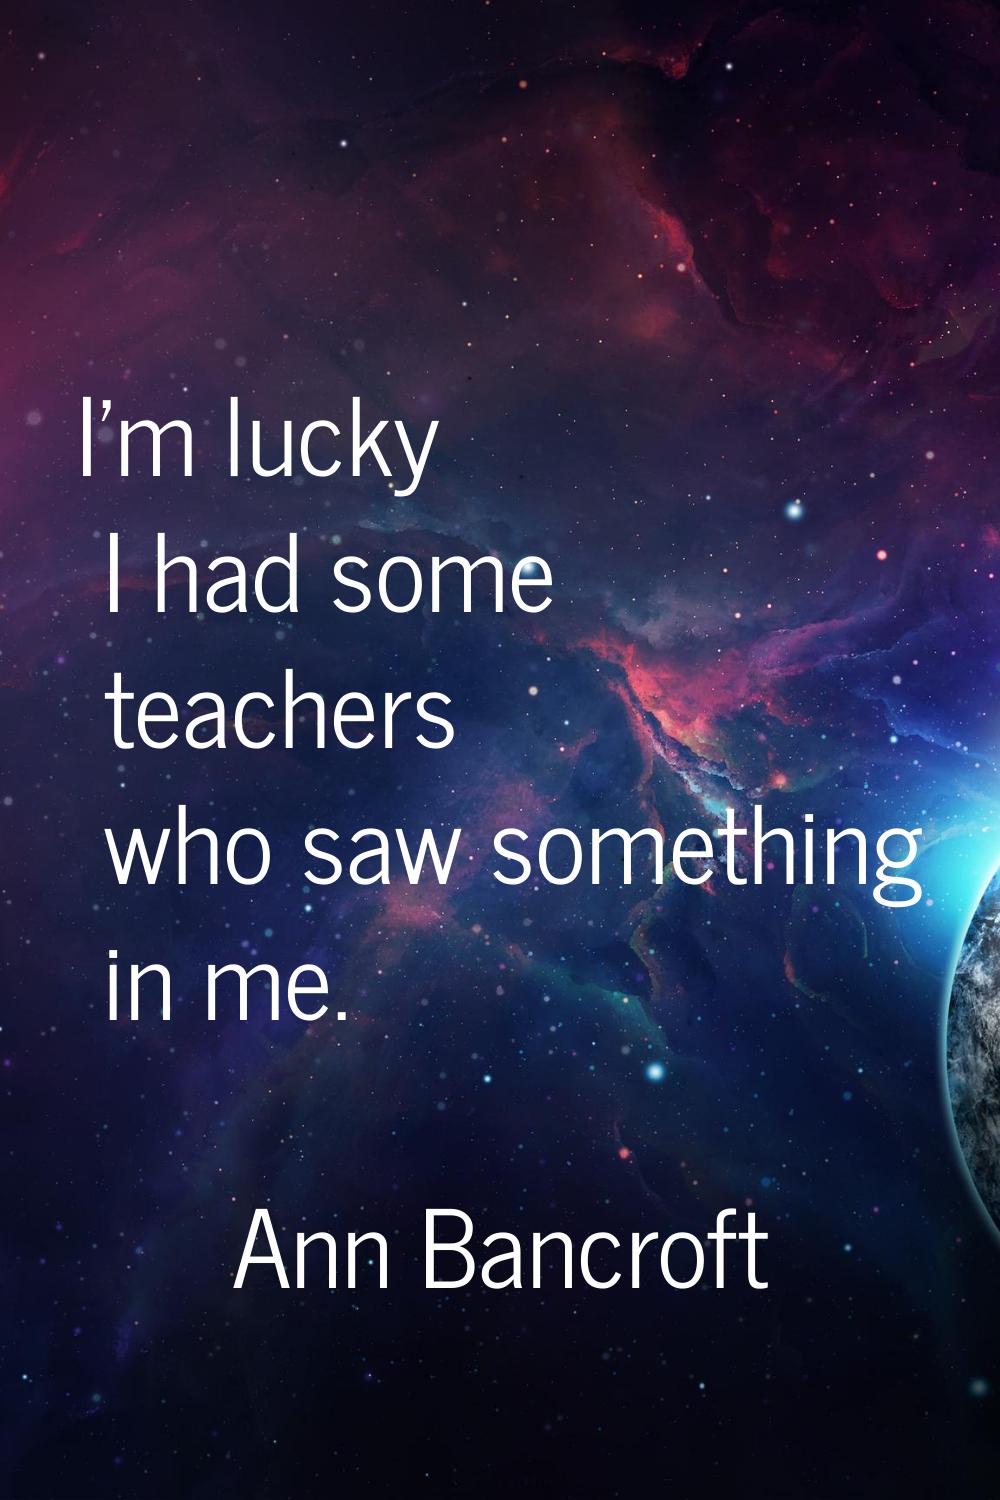 I'm lucky I had some teachers who saw something in me.